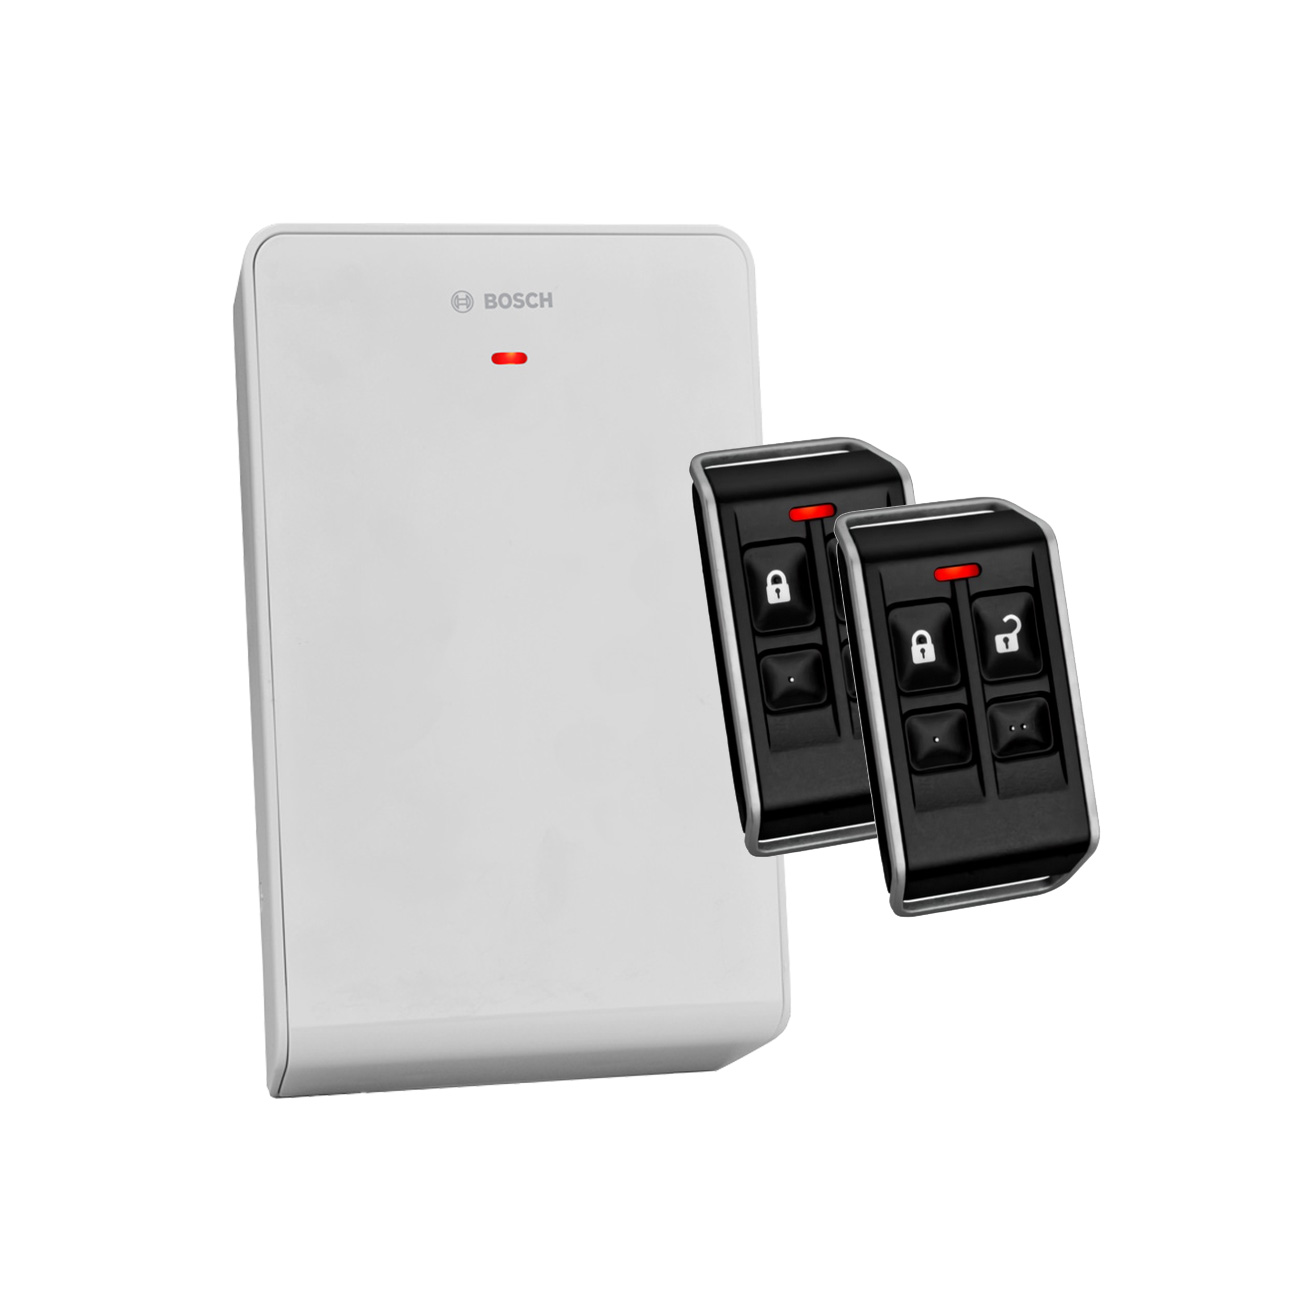 BOSCH RADION DELUXE WIRELESS KEY FOB KIT INCLUDES 1 x B810 RECEIVER & 2 x RFKF-FBS 4 BUTTON KEY FOB TRANSMITTERS 433MHz SUITS SOLUTION 3000